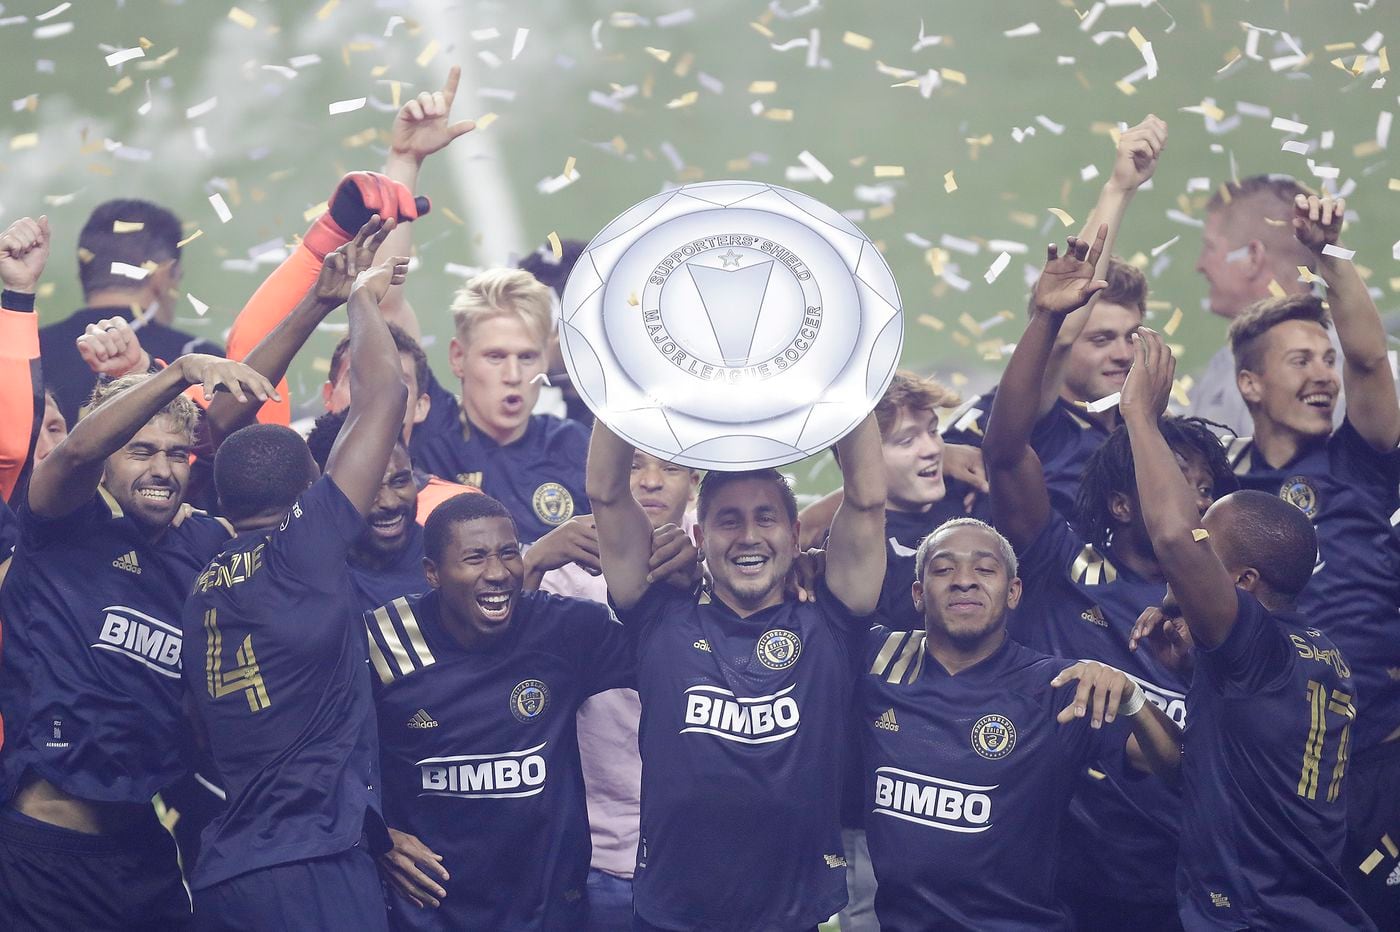 Philadelphia Union win 2020 MLS Supporters' Shield, their first ever trophy